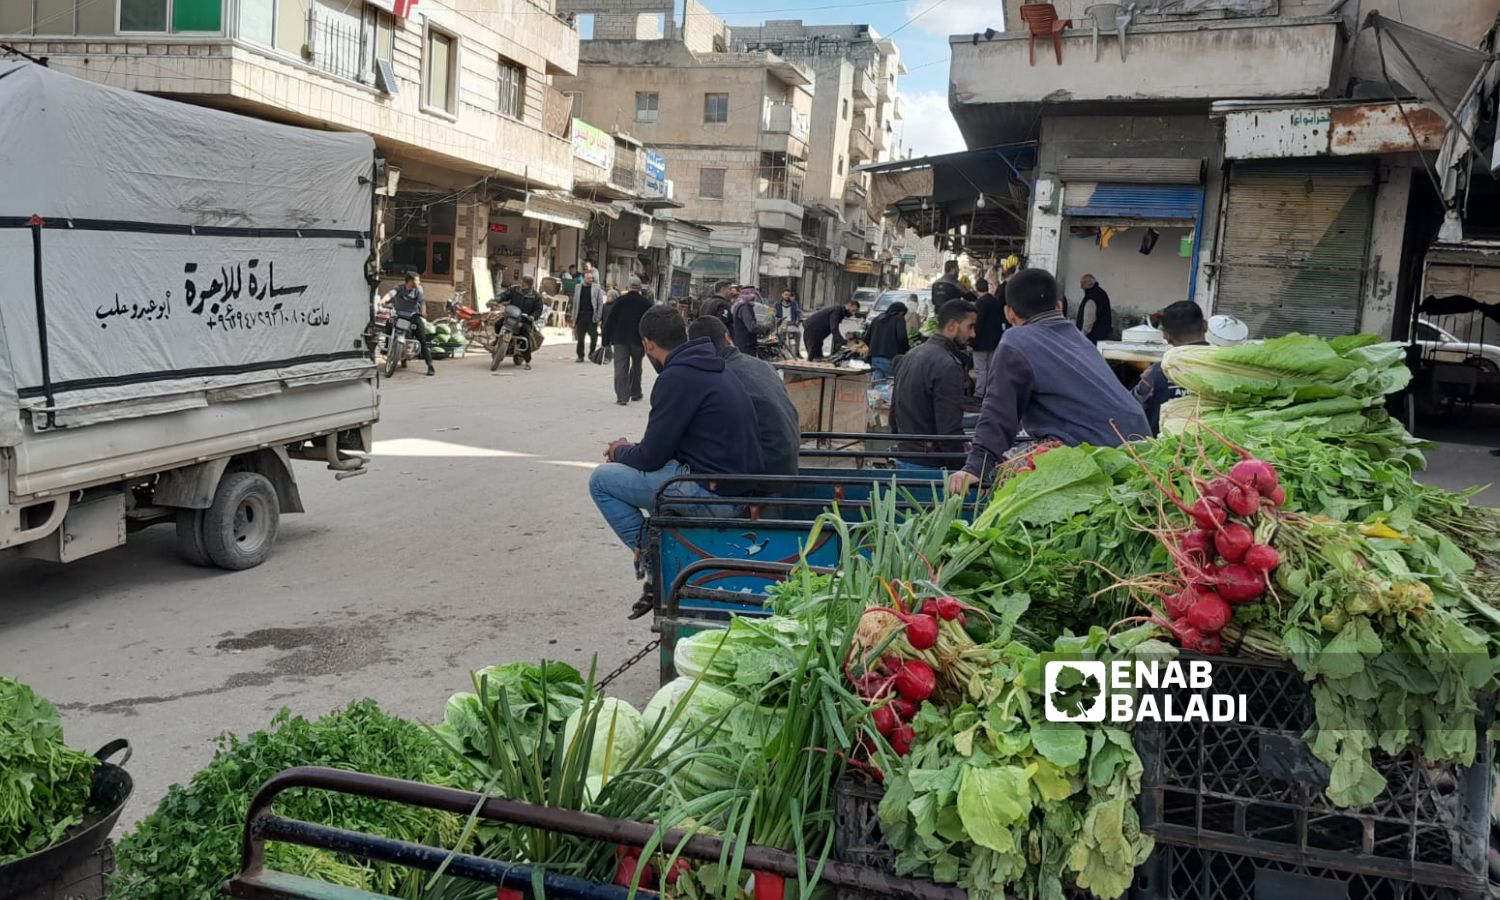 Daily workers waiting for a job opportunity in the main market of Idlib - March 24, 2023 (Enab Baladi/Anas al-Khouli)